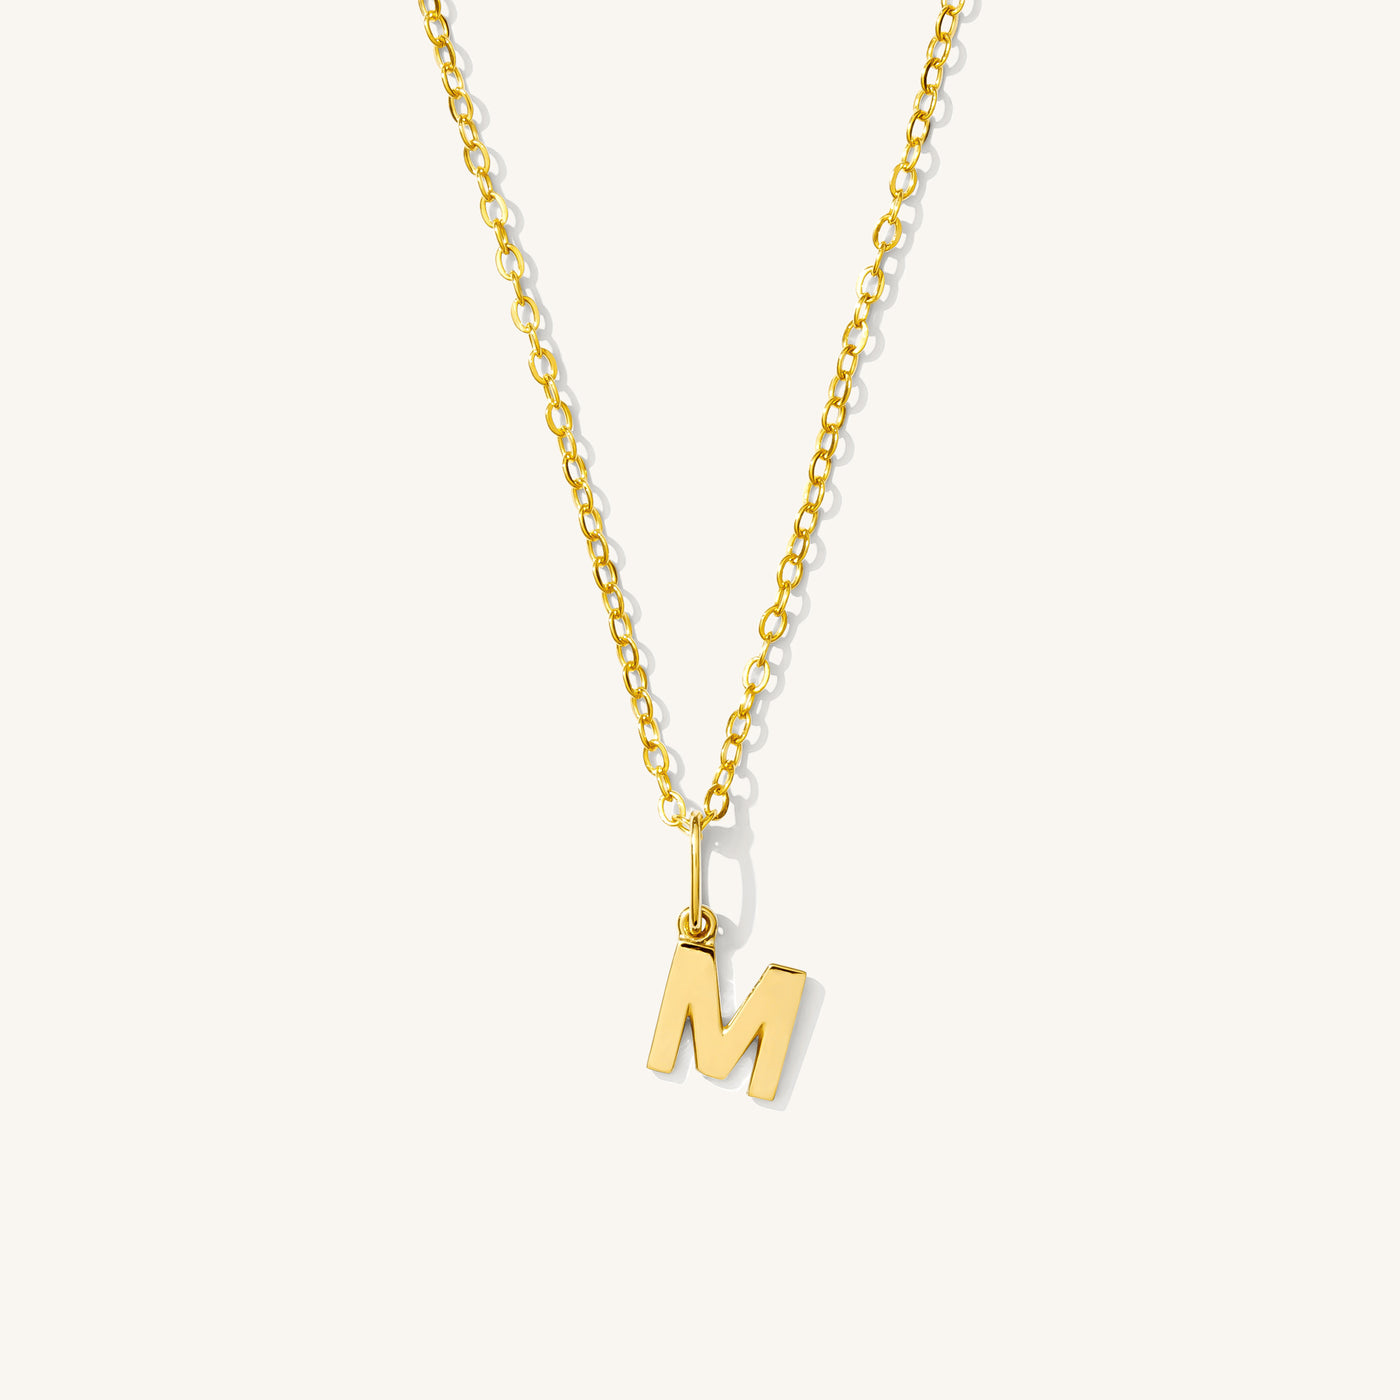 M Tiny Hanging Initial Necklace